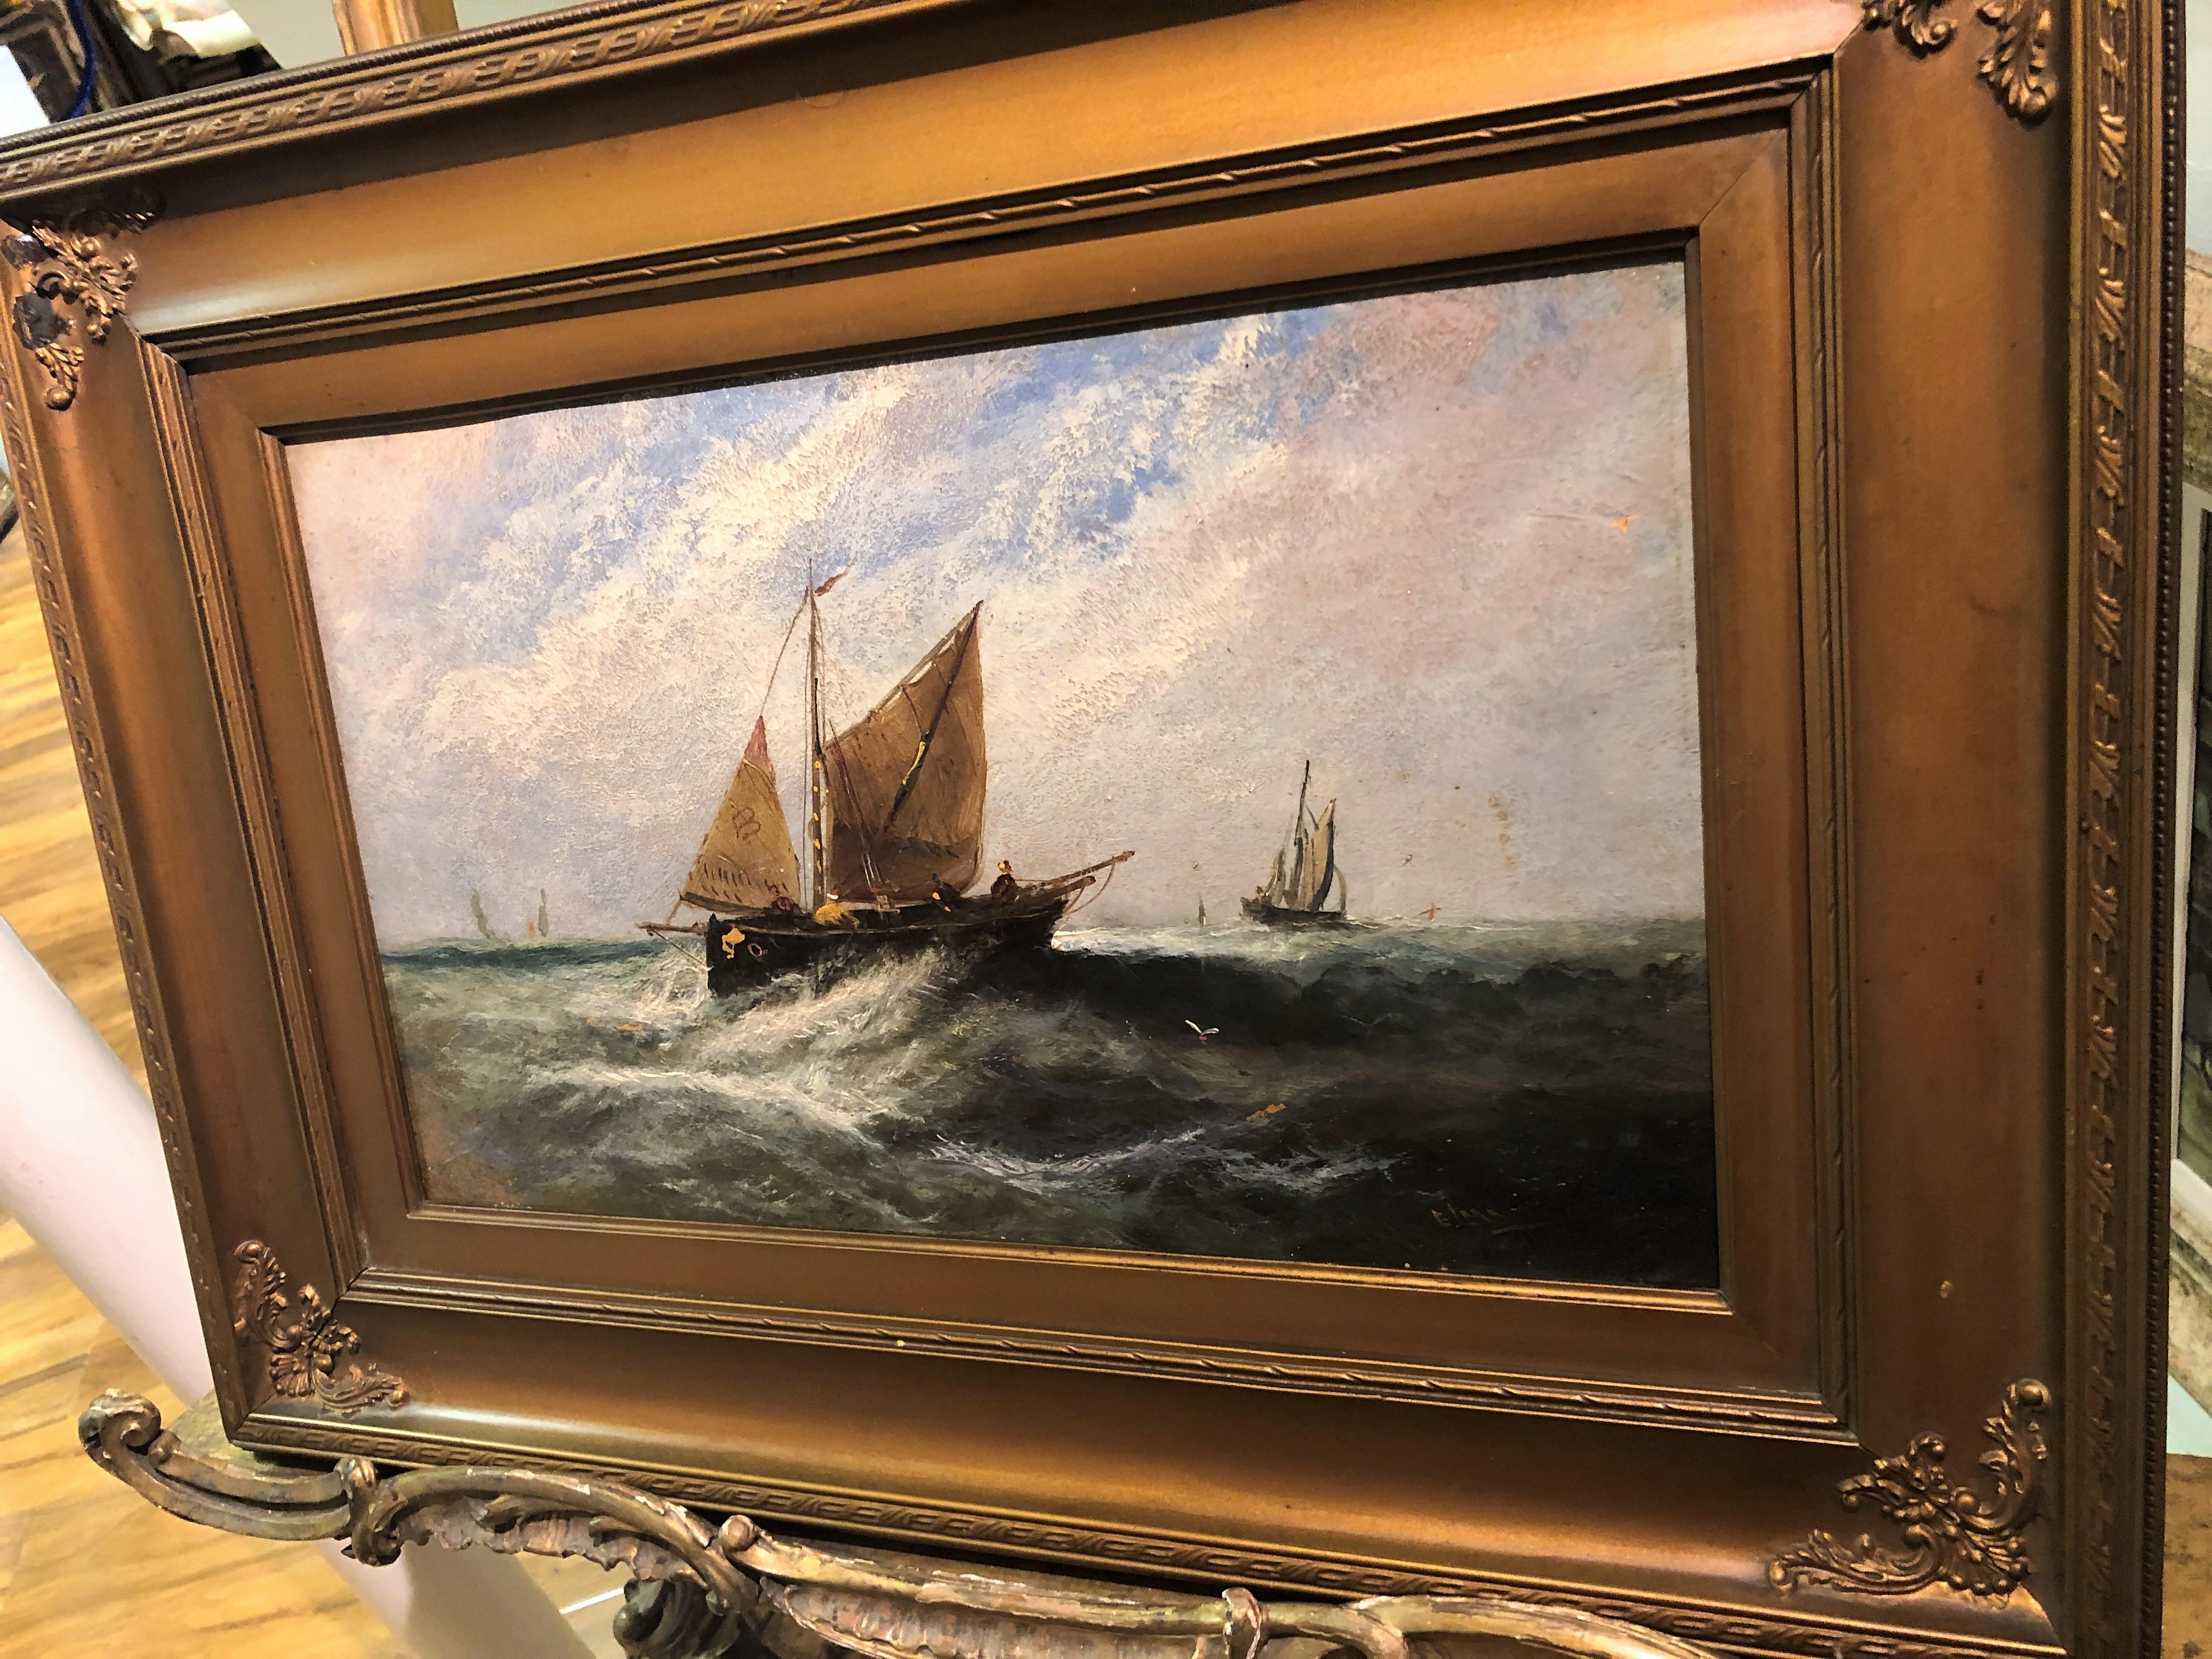 OIL PAINTING SIGNED OLD FINE BOAT/ SHIP PAINTER 19th Century BRITISH SCHOOL

Fine Original Antique 19th Century British OLD MASTER

OIL PAINTING

GOLD GILT FRAME

New Collection

NEW COLLECTION Of RARE PIECES OF ENGLISH HISTORY
 
By Erest Lara